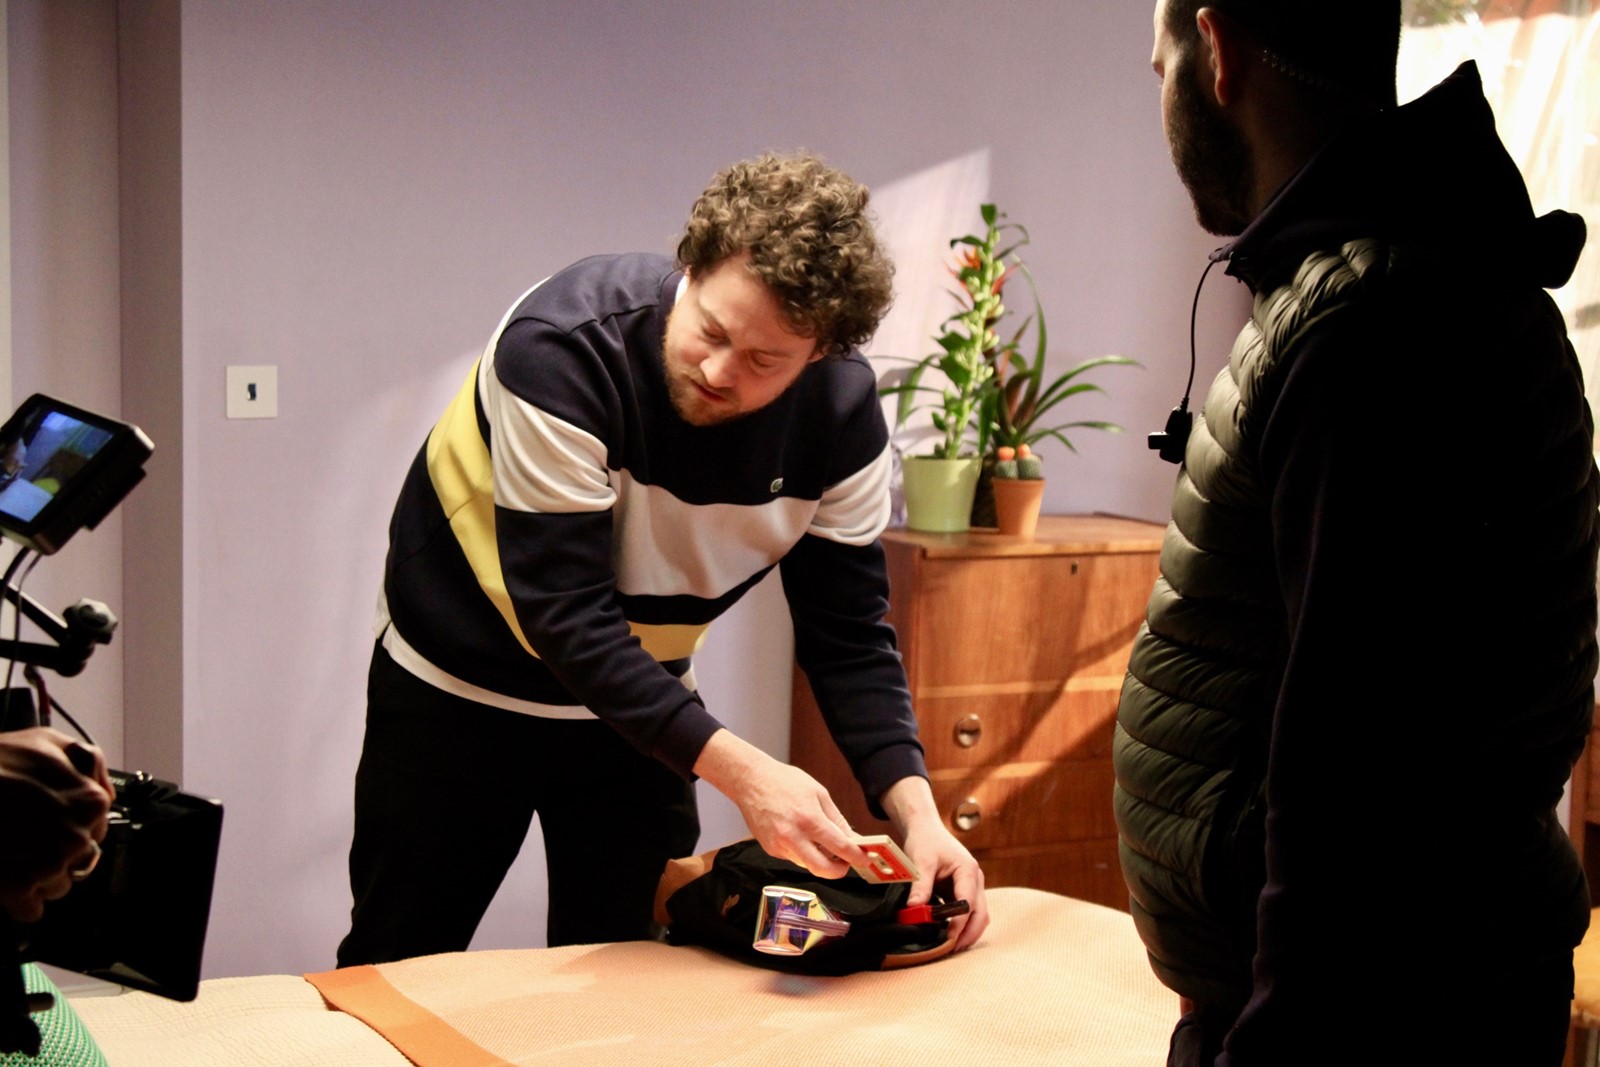 Behind the scenes of Metronomy’s ‘Lately’ video